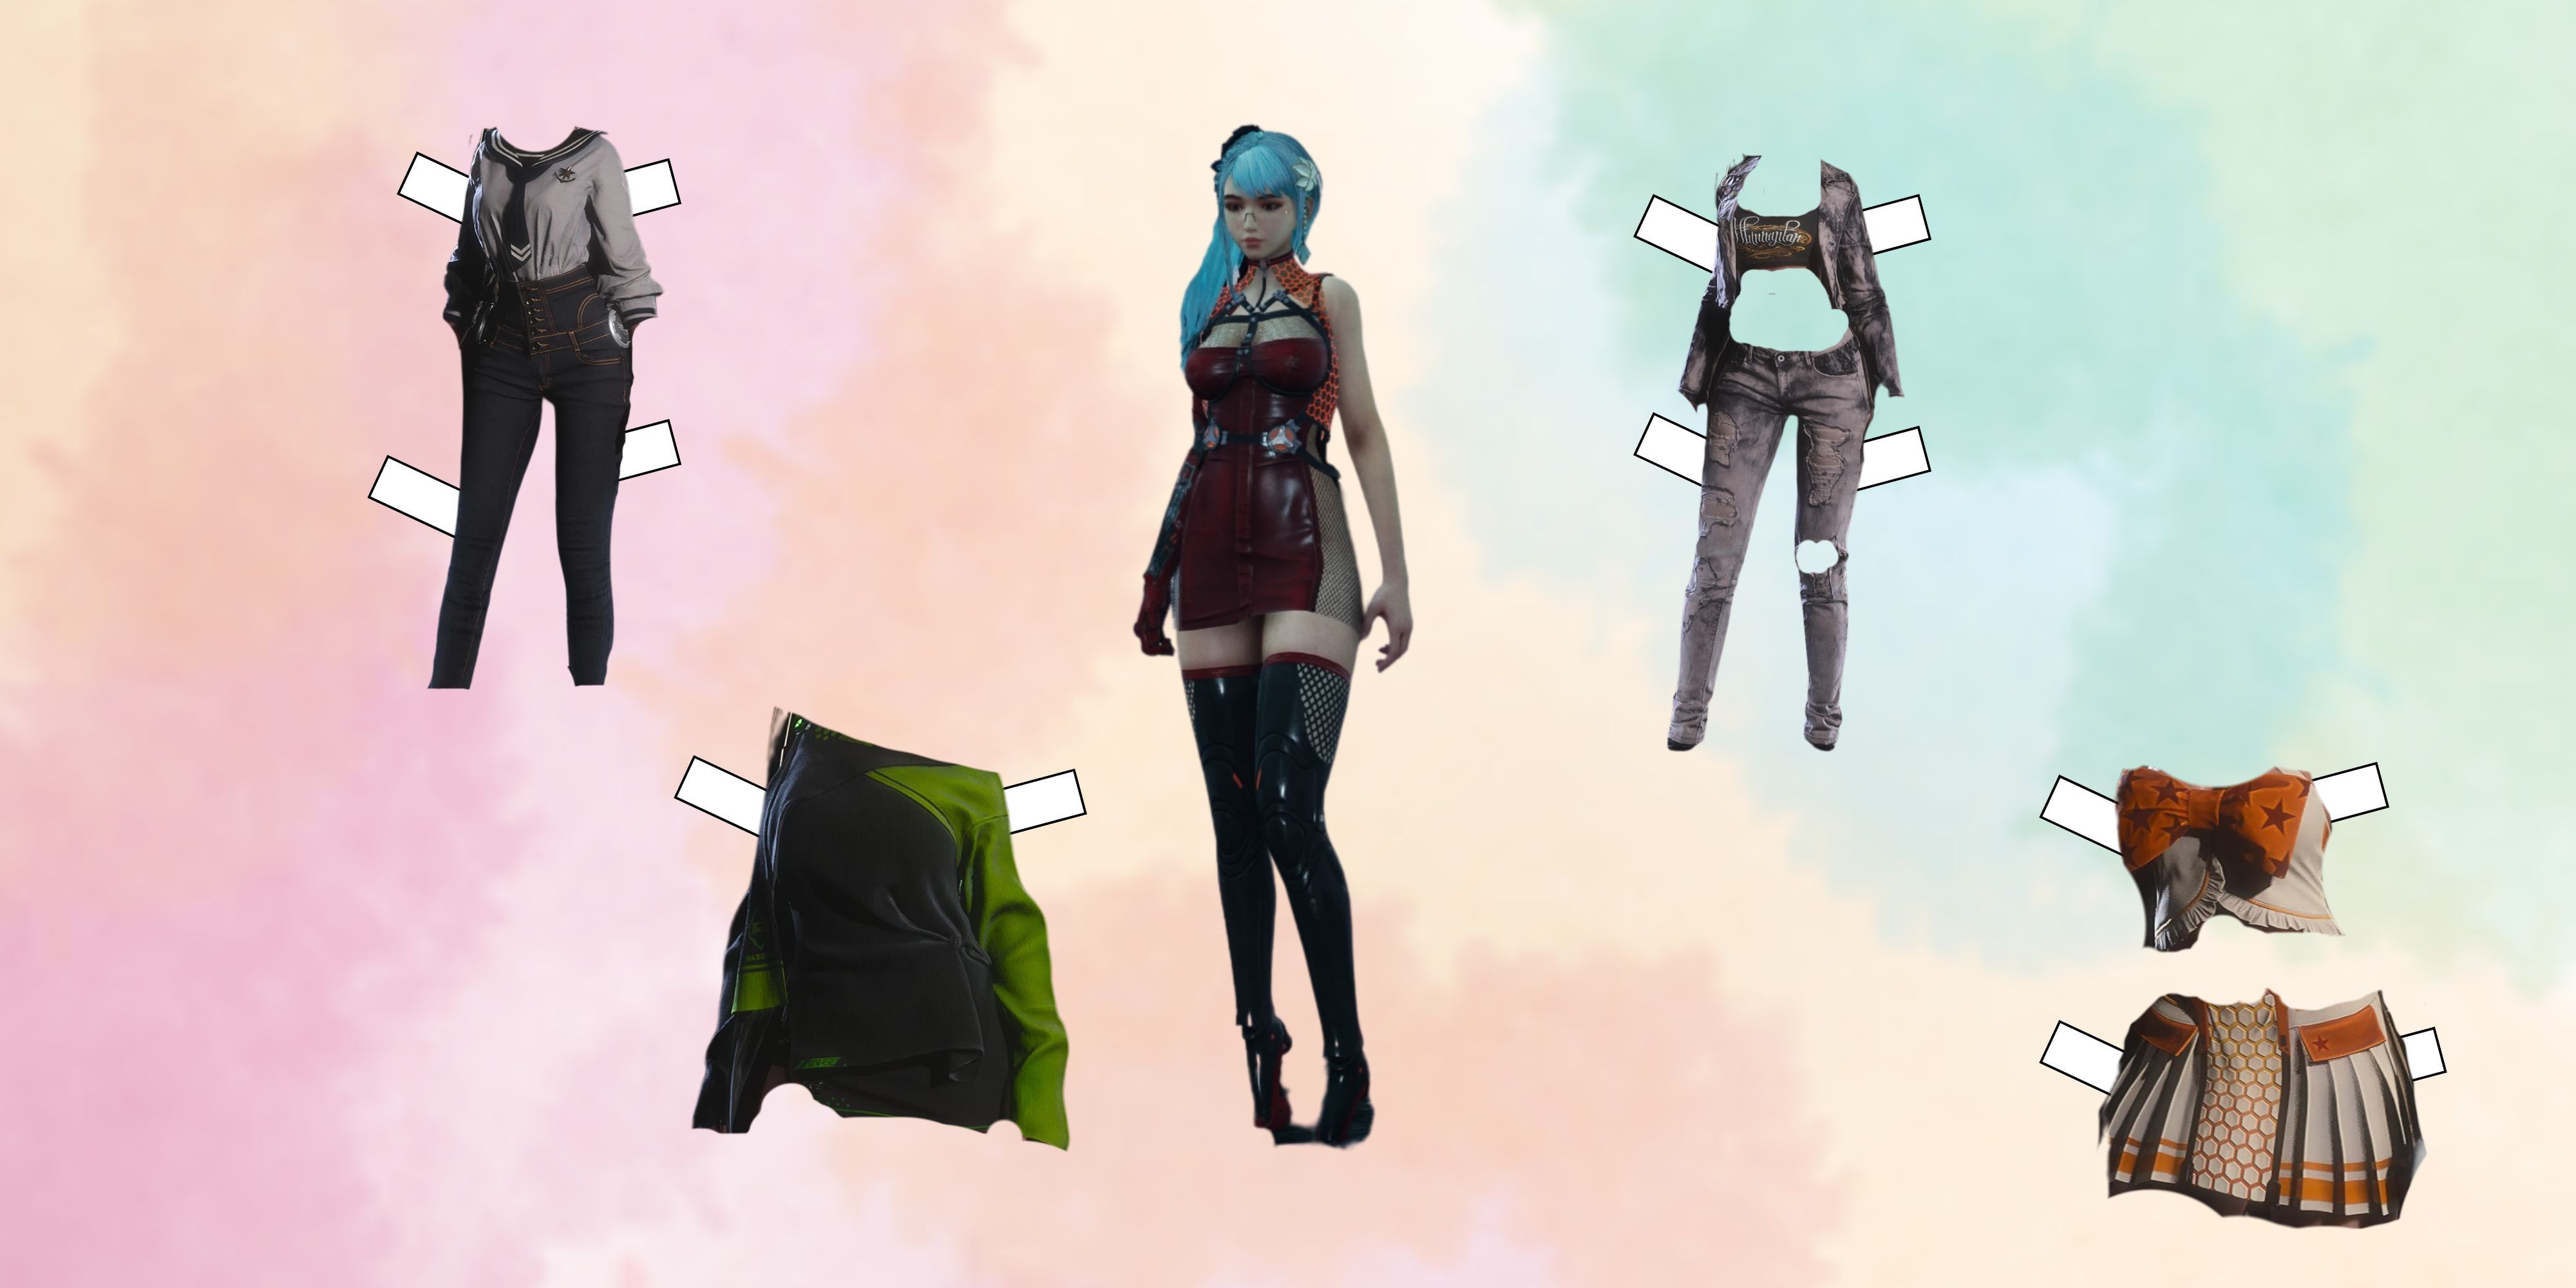 Eve from Stellar Blade surrounded by her outfits like a dress up paper doll